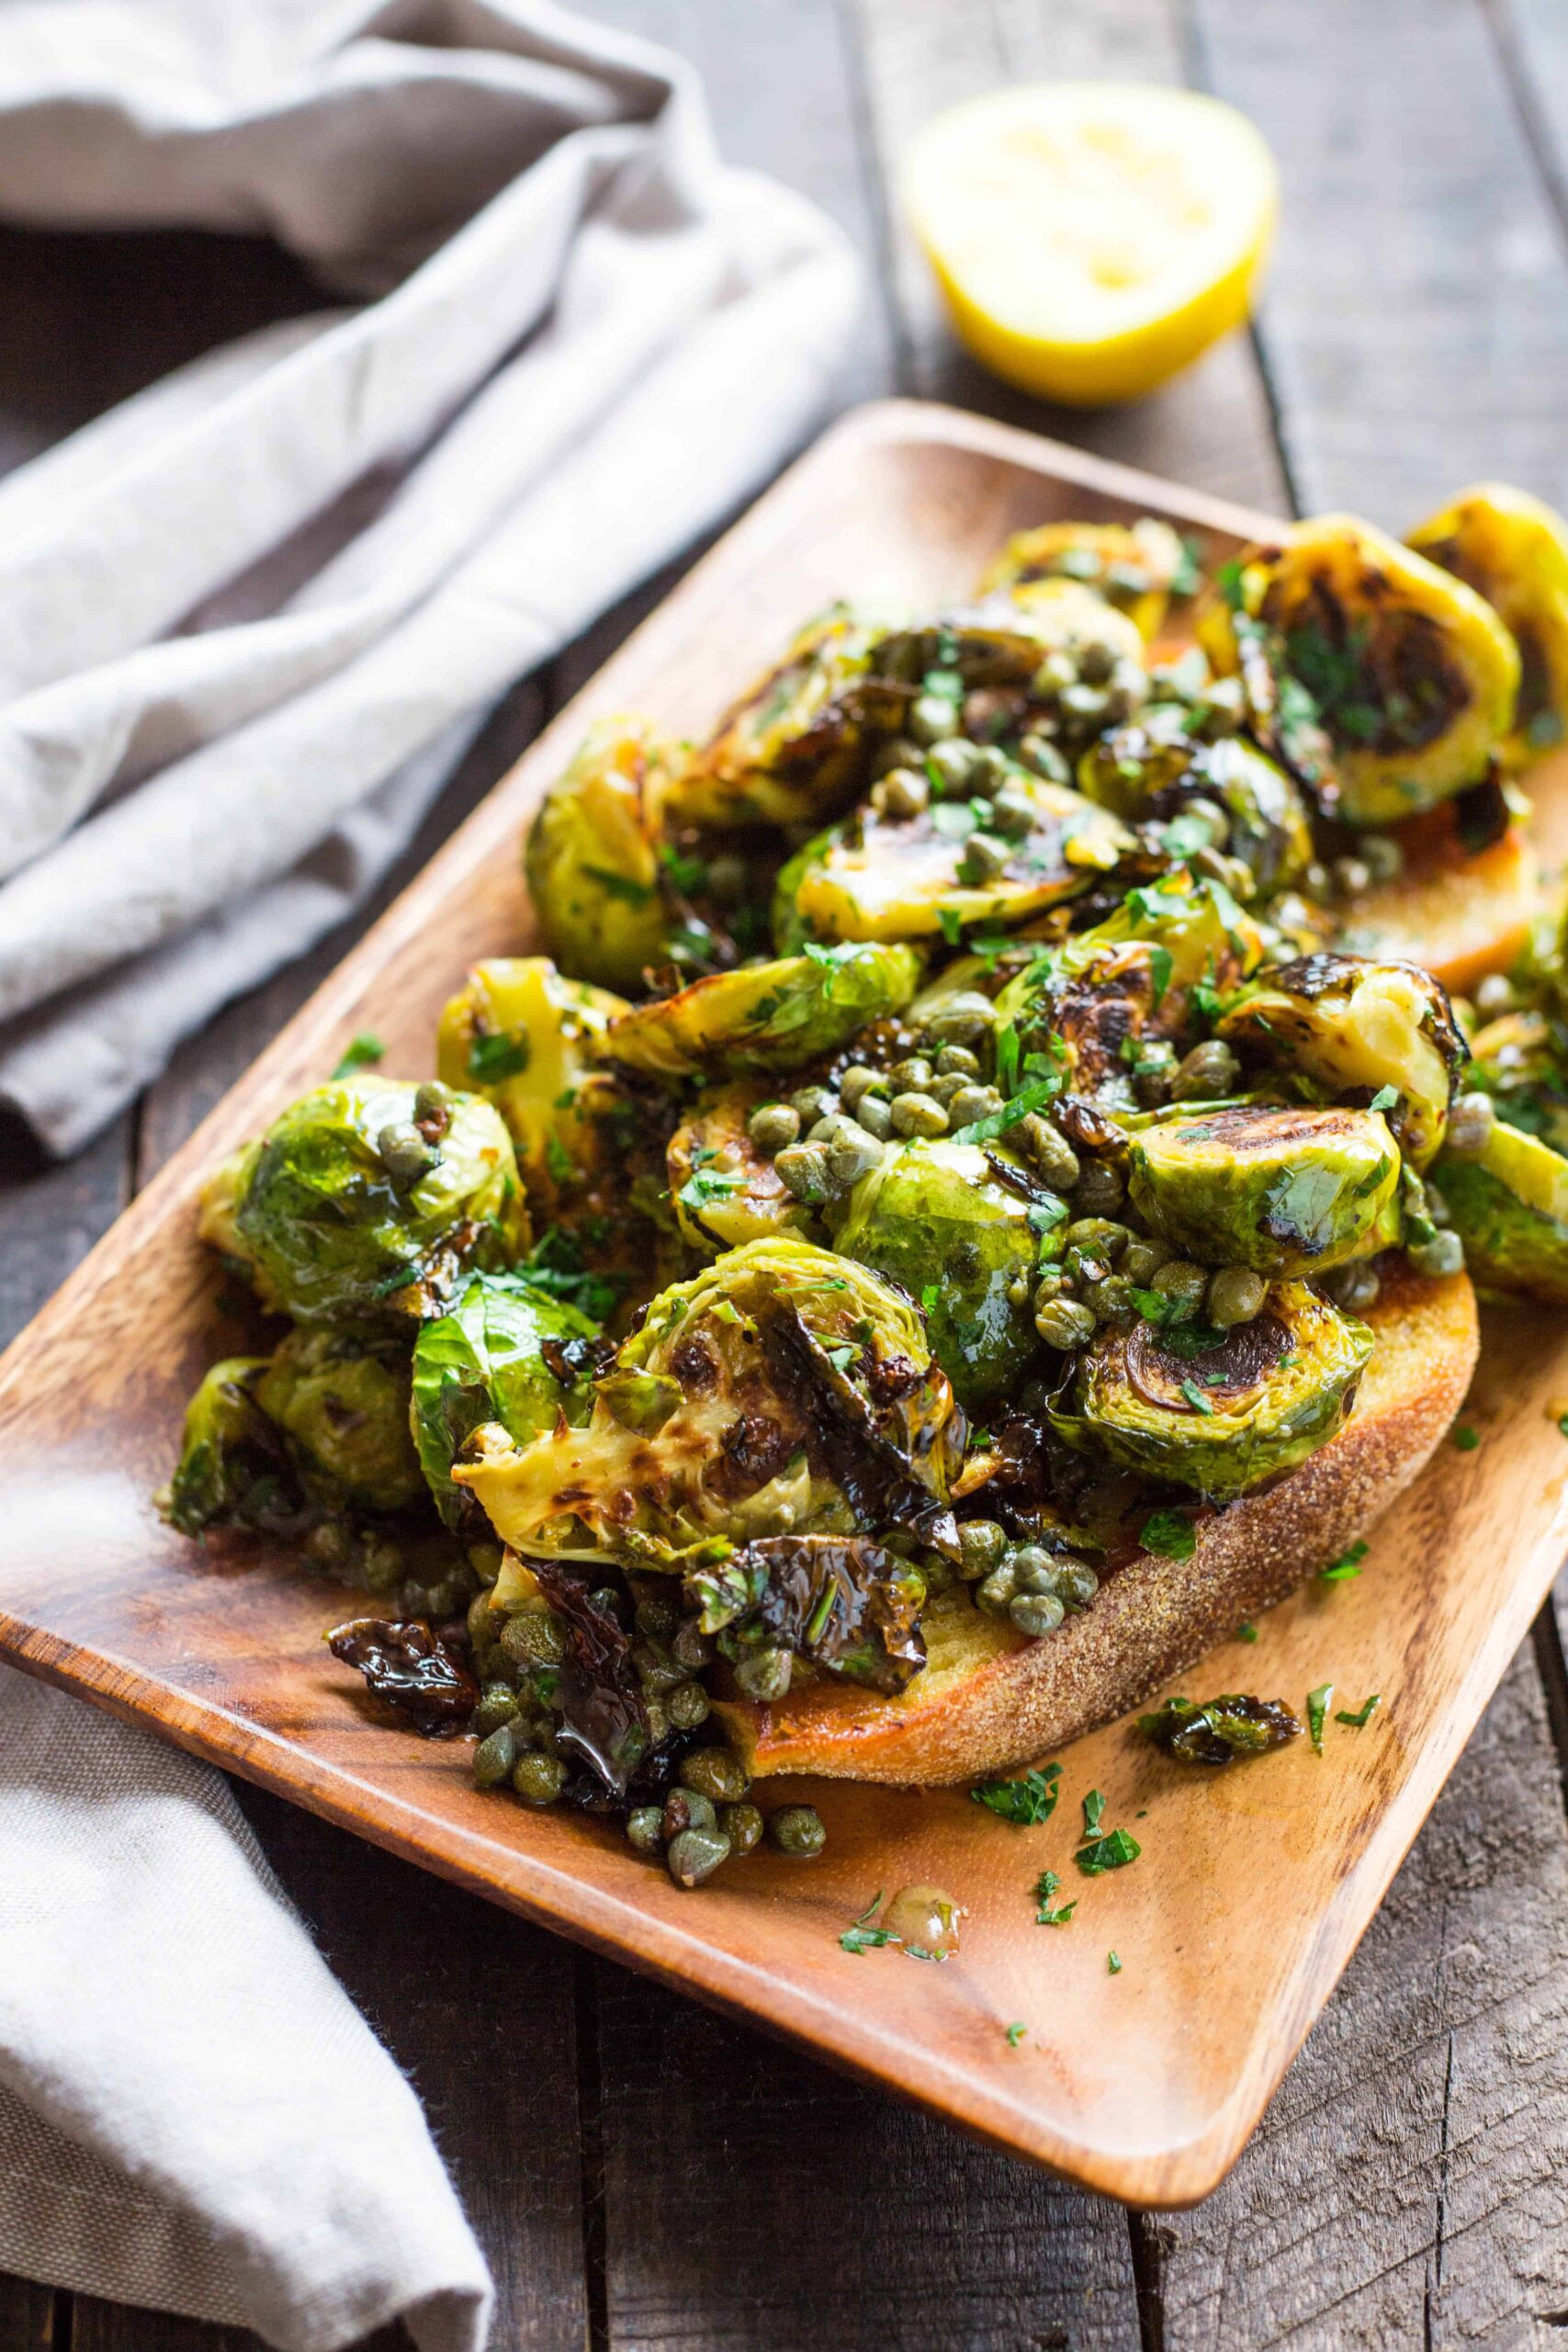 Brussels Sprouts with Anchovy Caper Butter